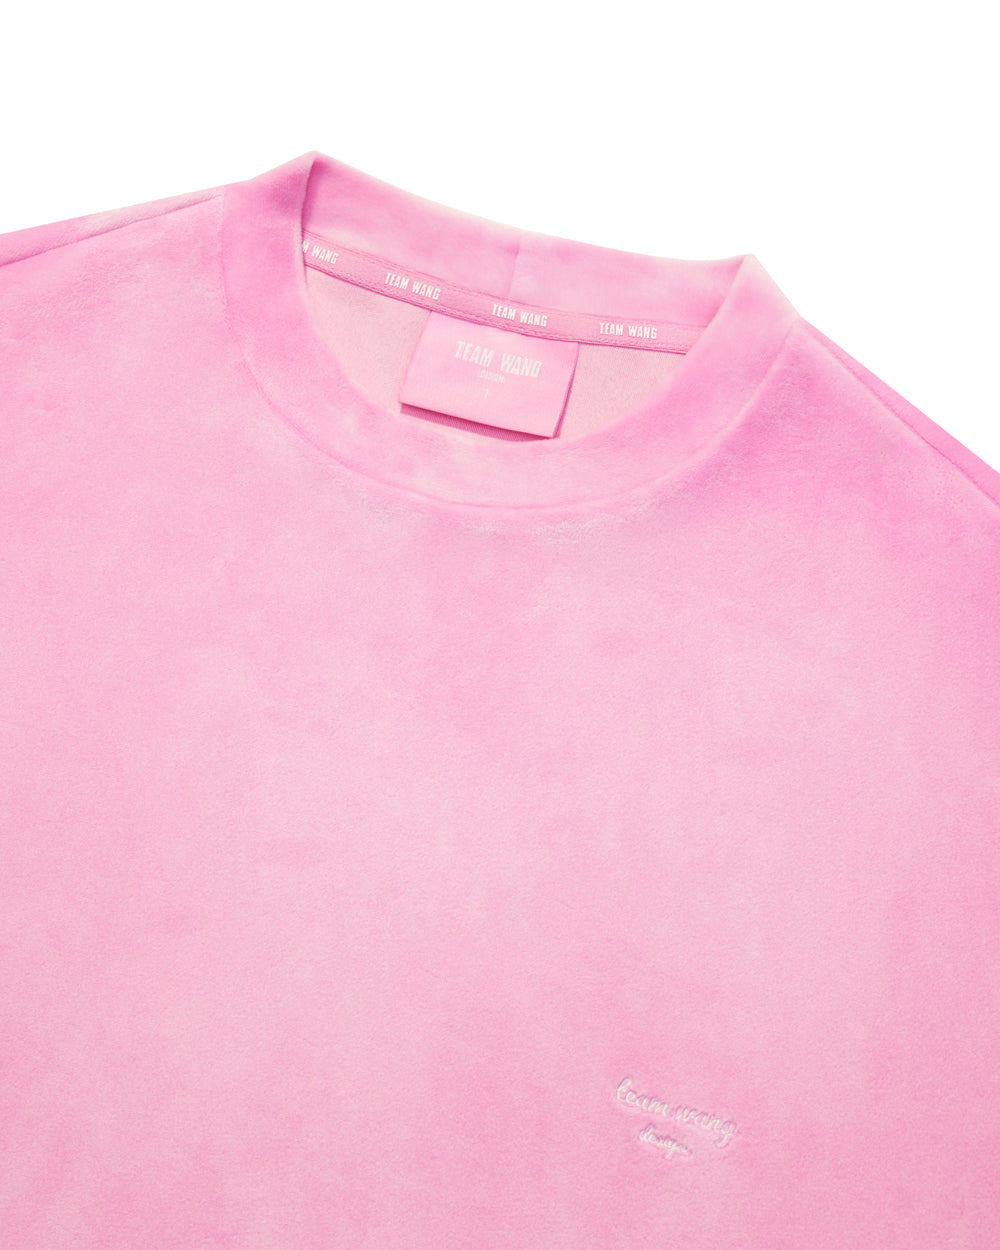    TEAM-WANG-DESIGN-STAY-FOR-THE-NIGHT-OVERSIZED-T-SHIRT-PINK-3